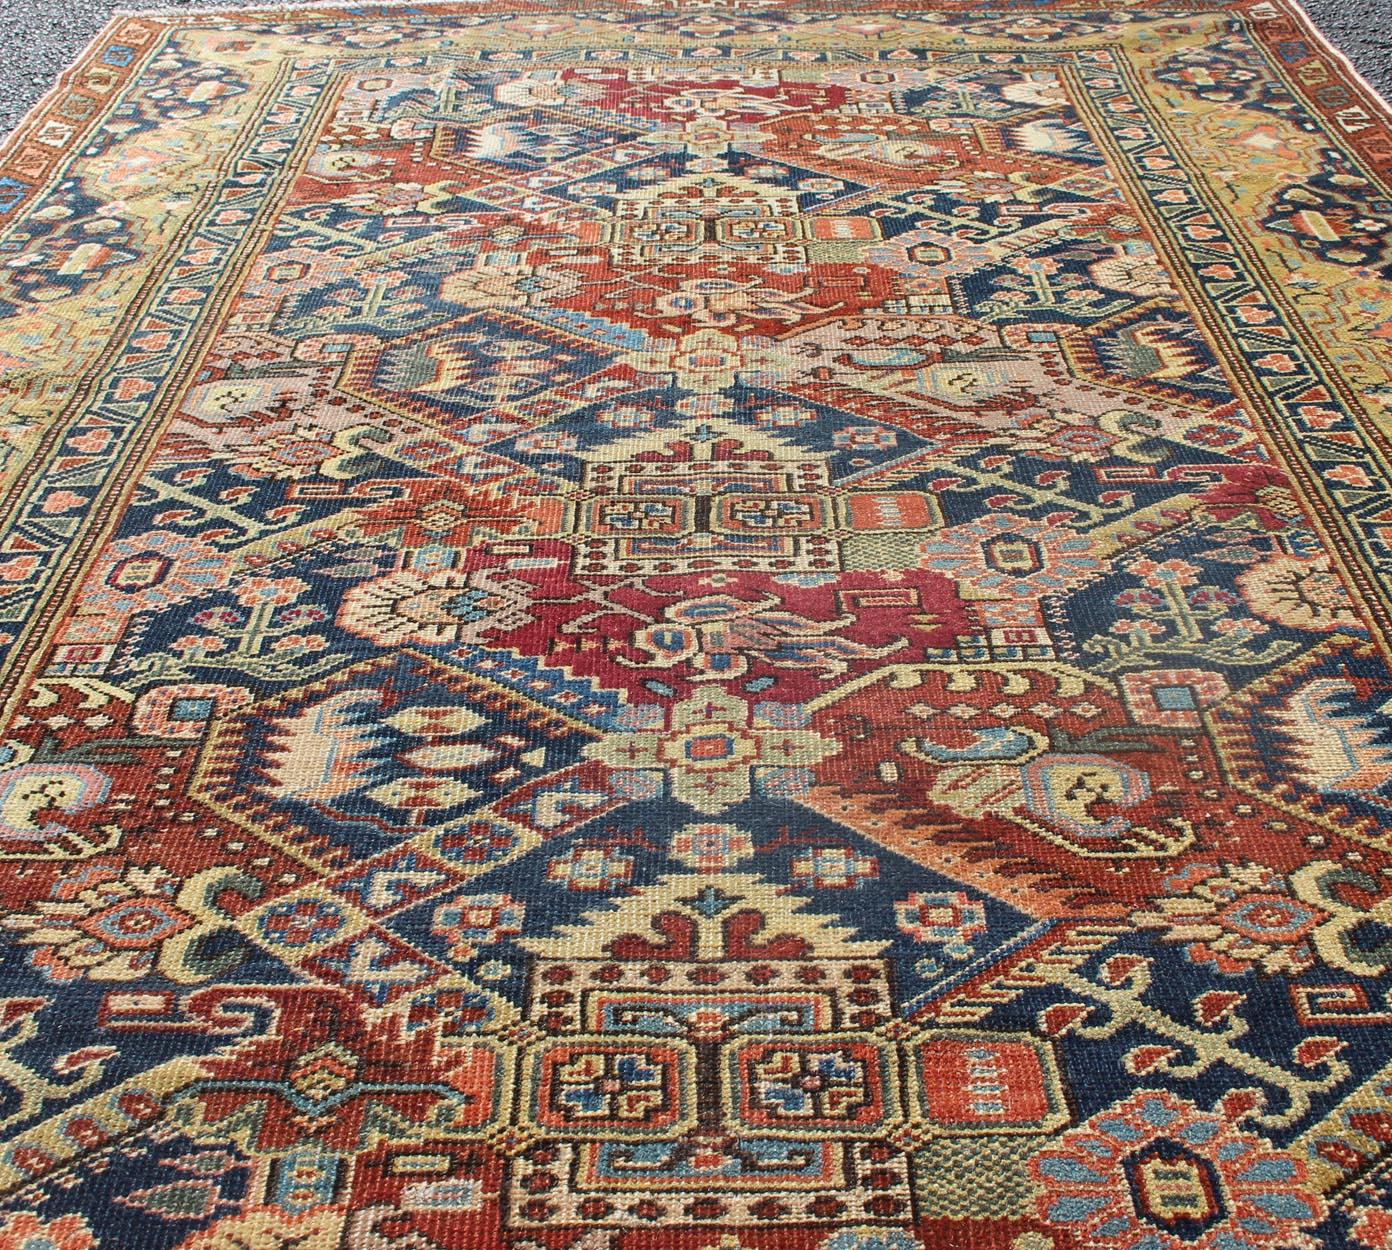 Russian 19th Century Exquisite Antique Caucasian Seychour Rug In Red's And Blue's For Sale